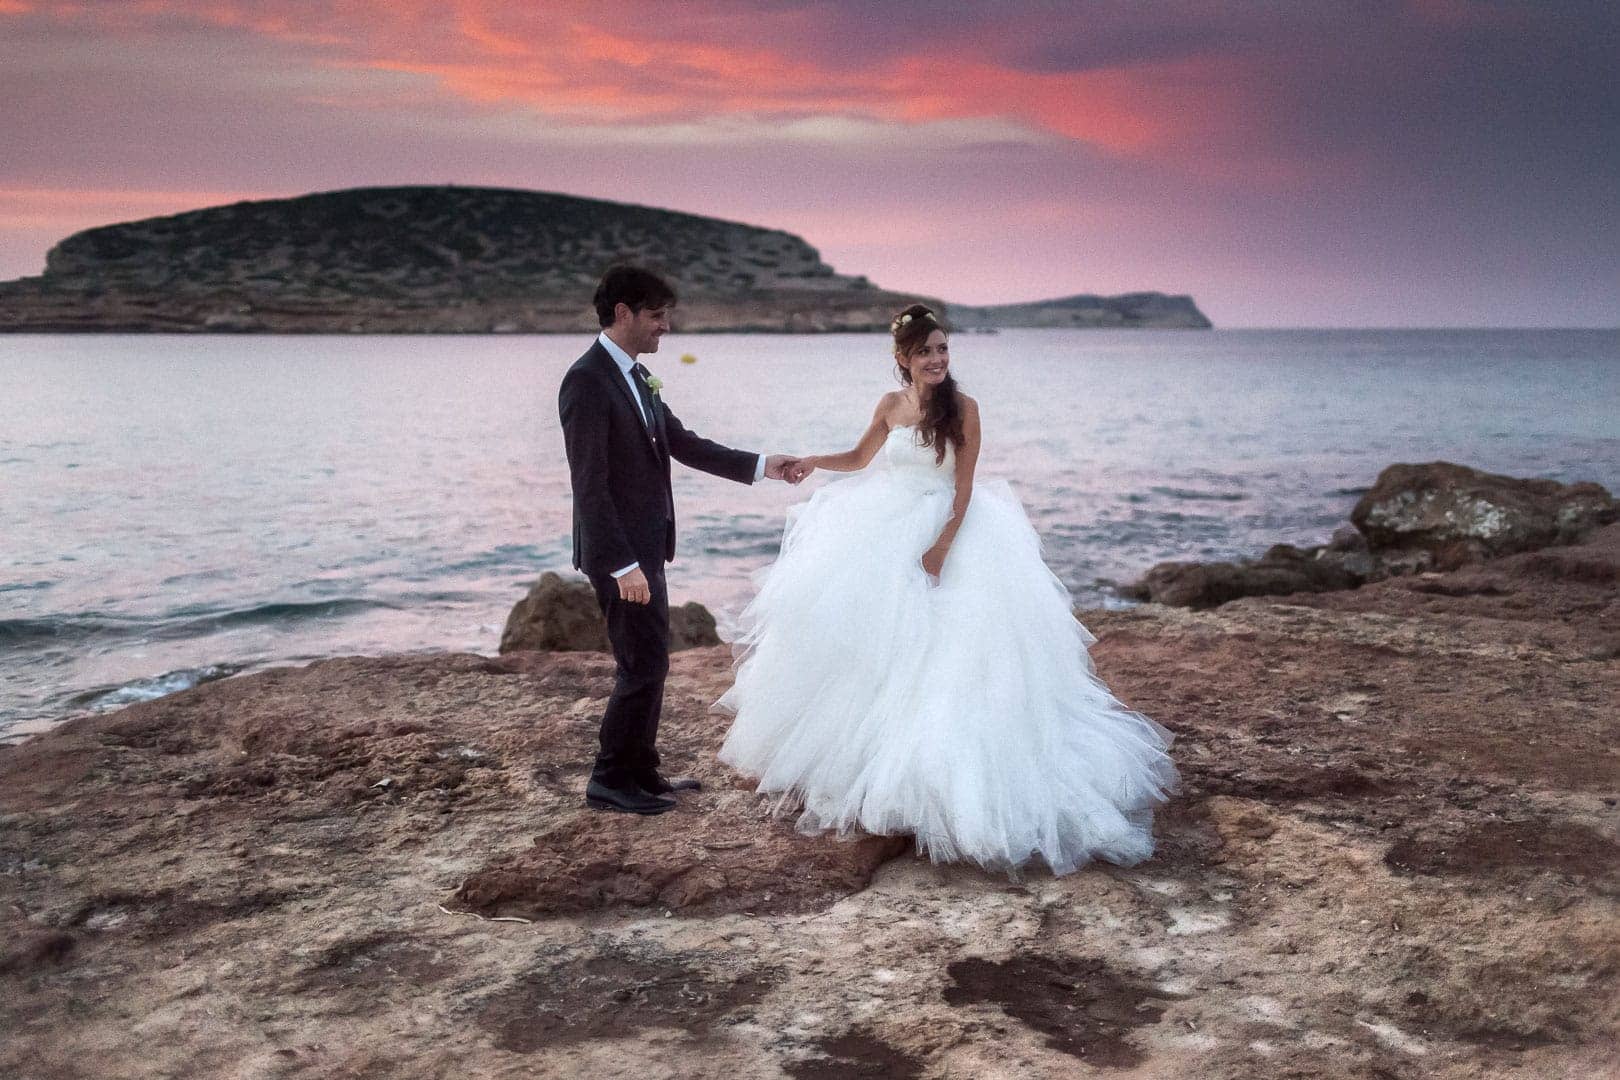 Post-wedding photography at sunset of newlyweds holding hands and happy in Cala Comte